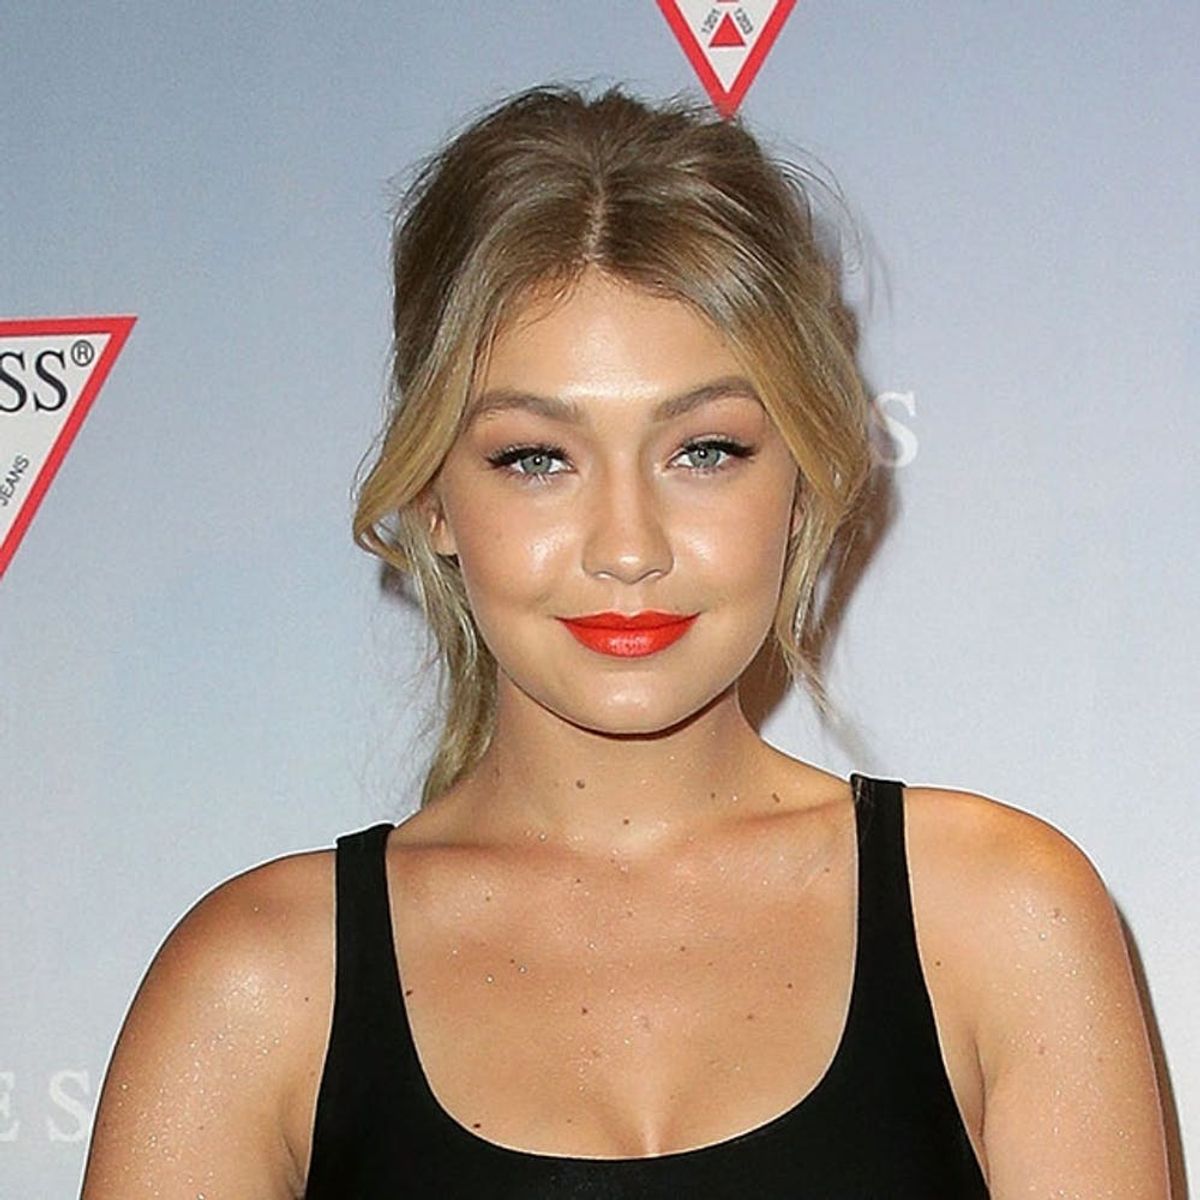 Gigi Hadid’s New Hair Color Will Remind You of Christina Aguilera’s in the ’00s